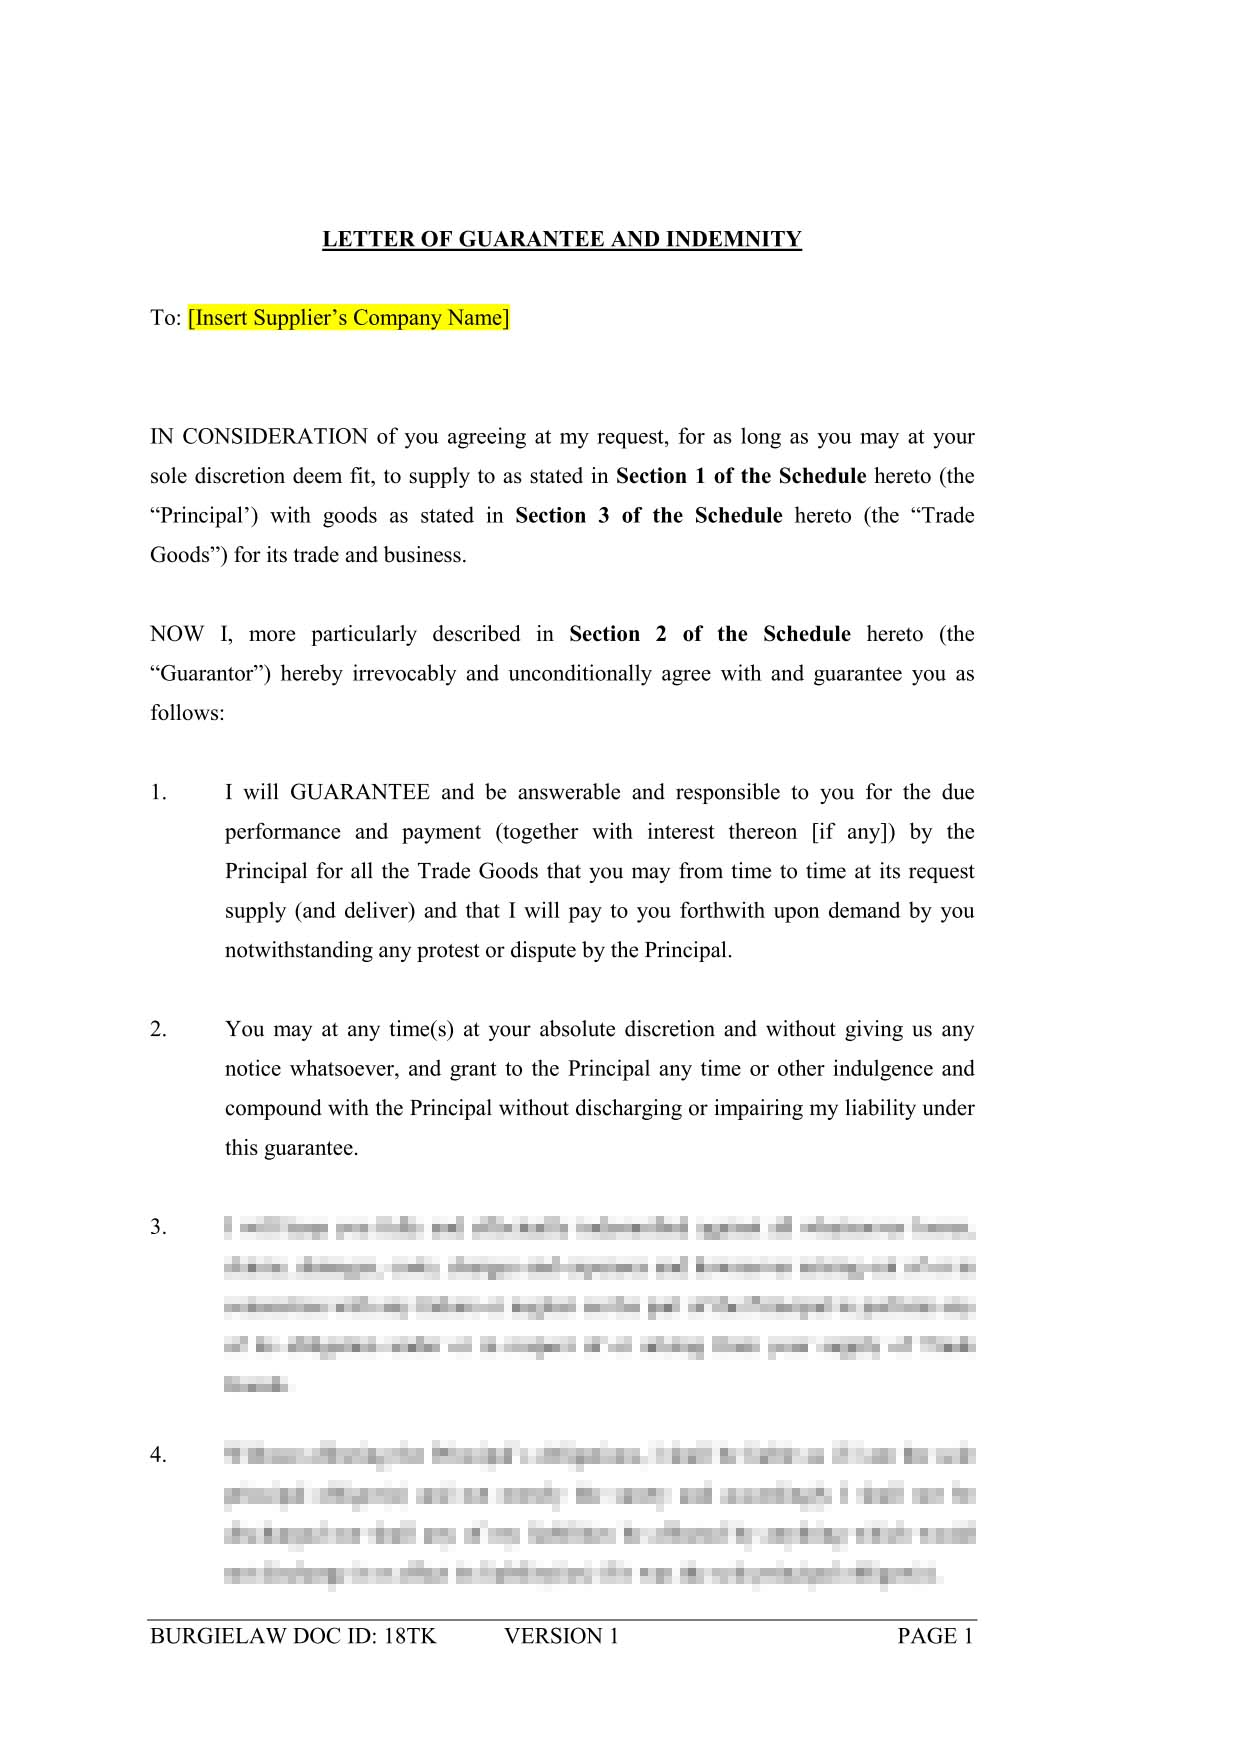 Guarantee Agreement Template Letter Of Guarantee And Indemnity Supplier Template